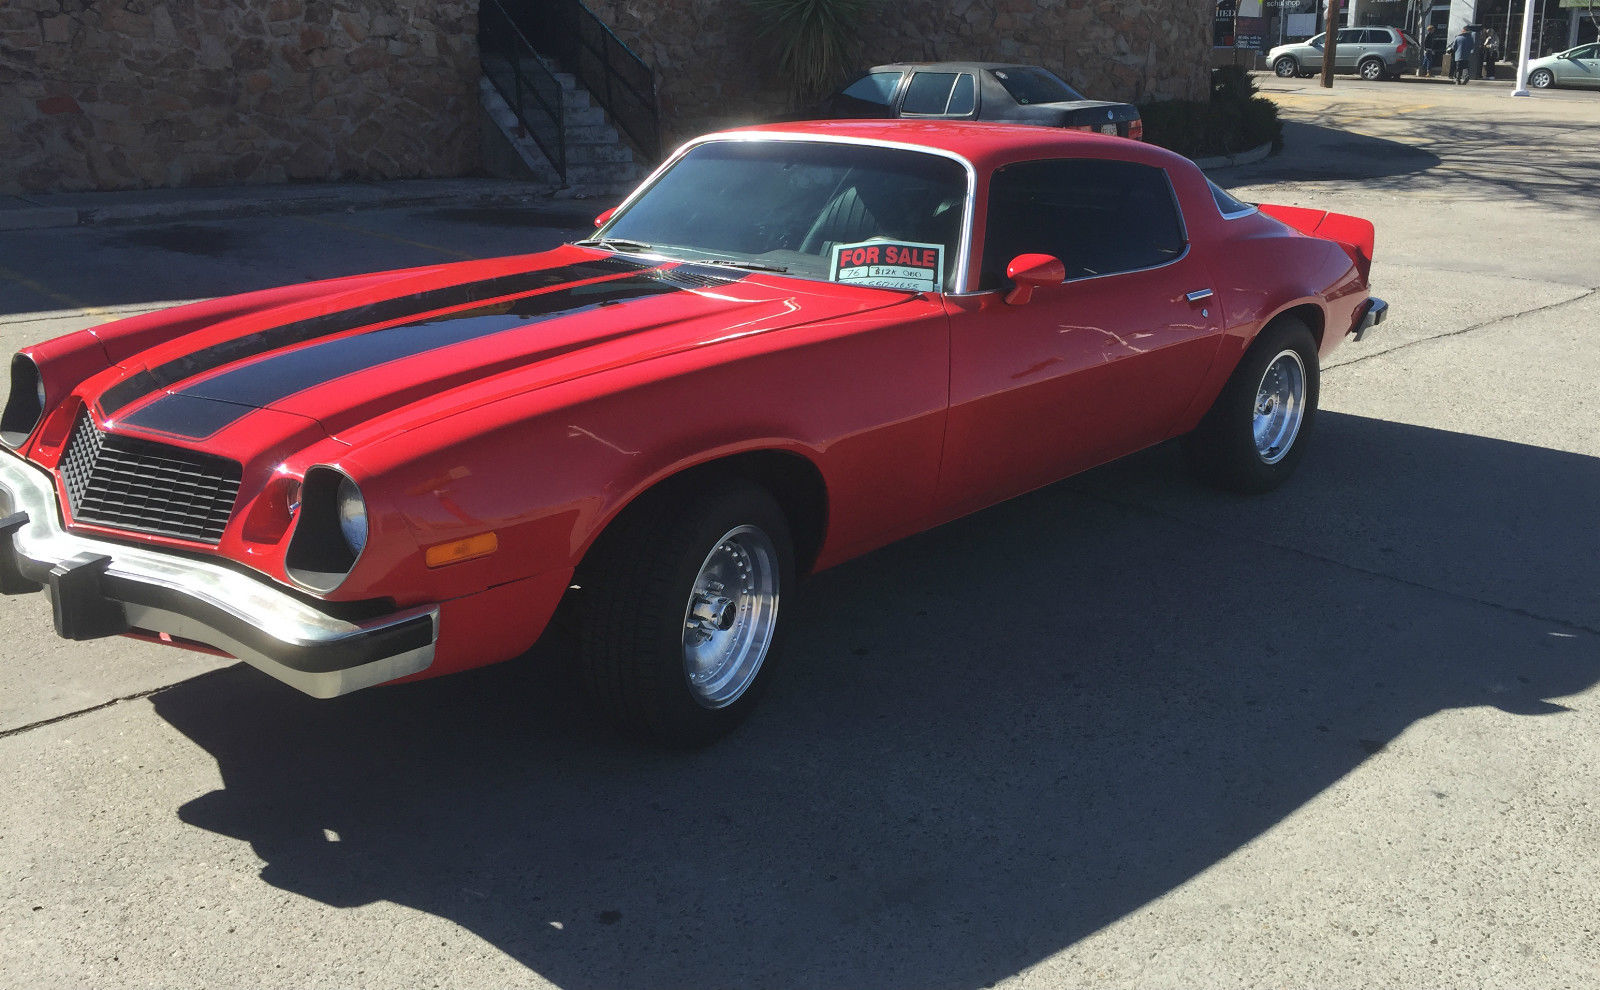 Red With Black Rally Stripes 76 Camaro Sport Coupe 350 V8 Great Condition For Sale In Albuquerque New Mexico United States For Sale Photos Technical Specifications Description